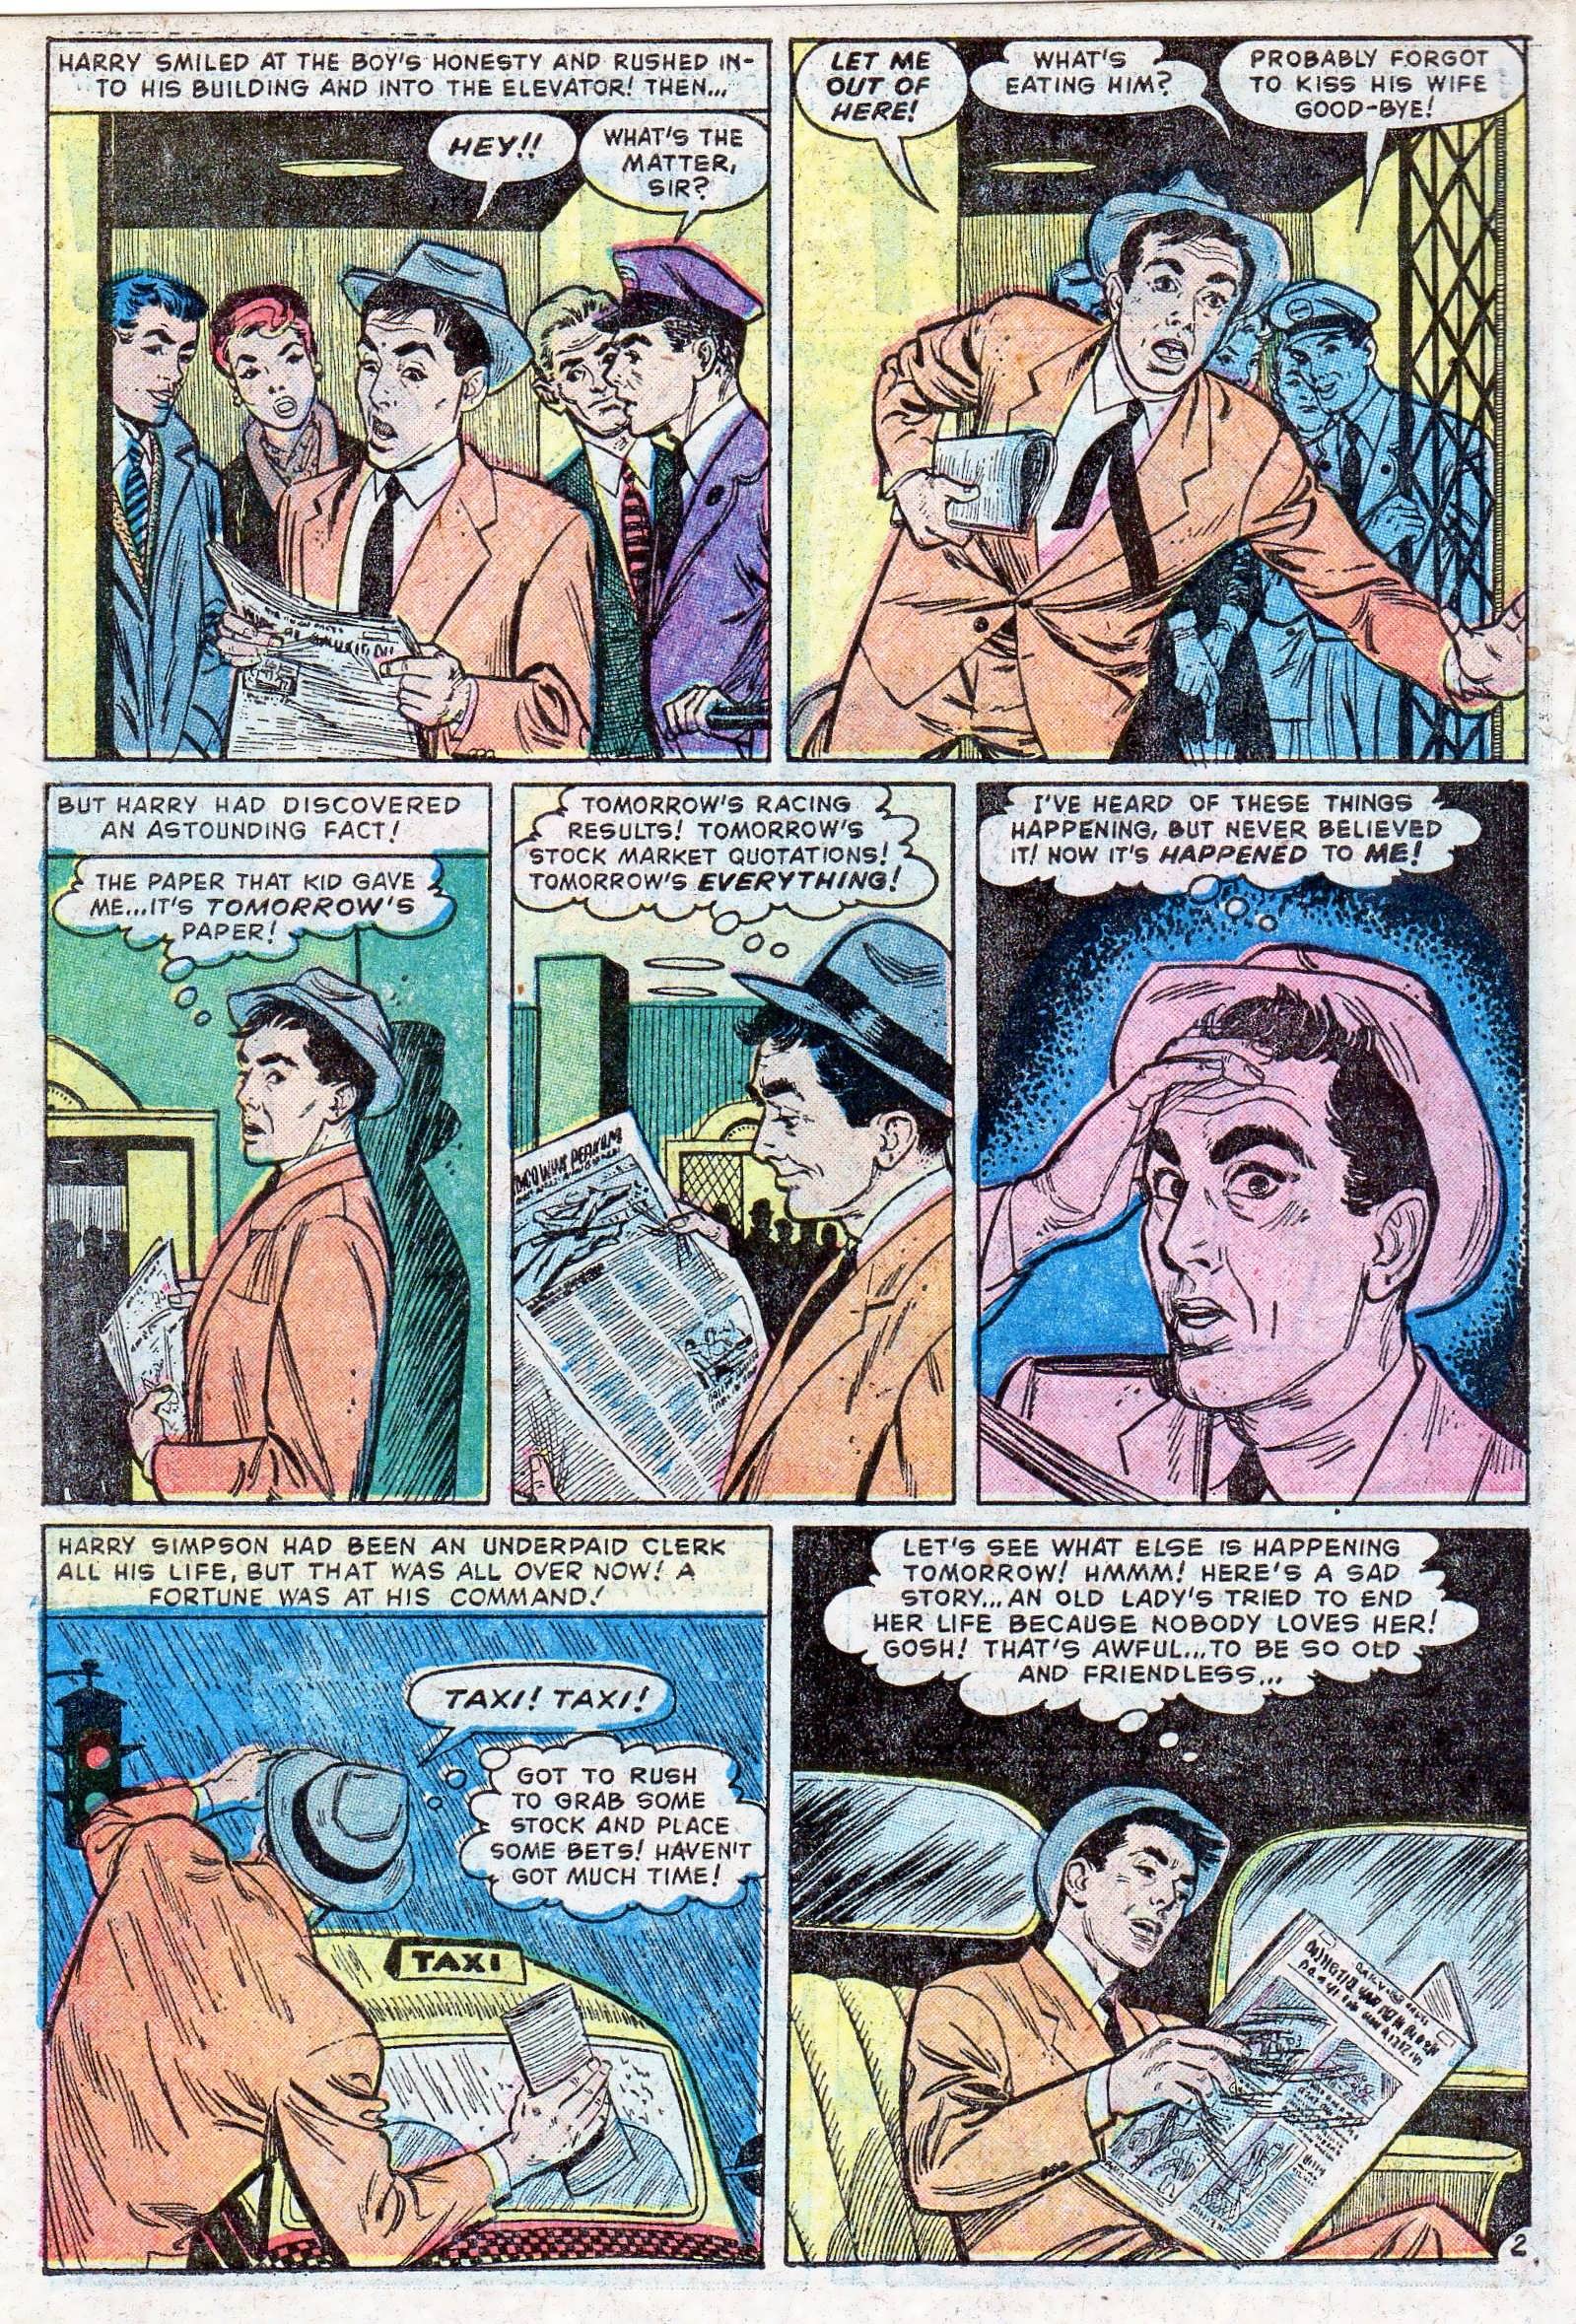 Marvel Tales (1949) 155 Page 29